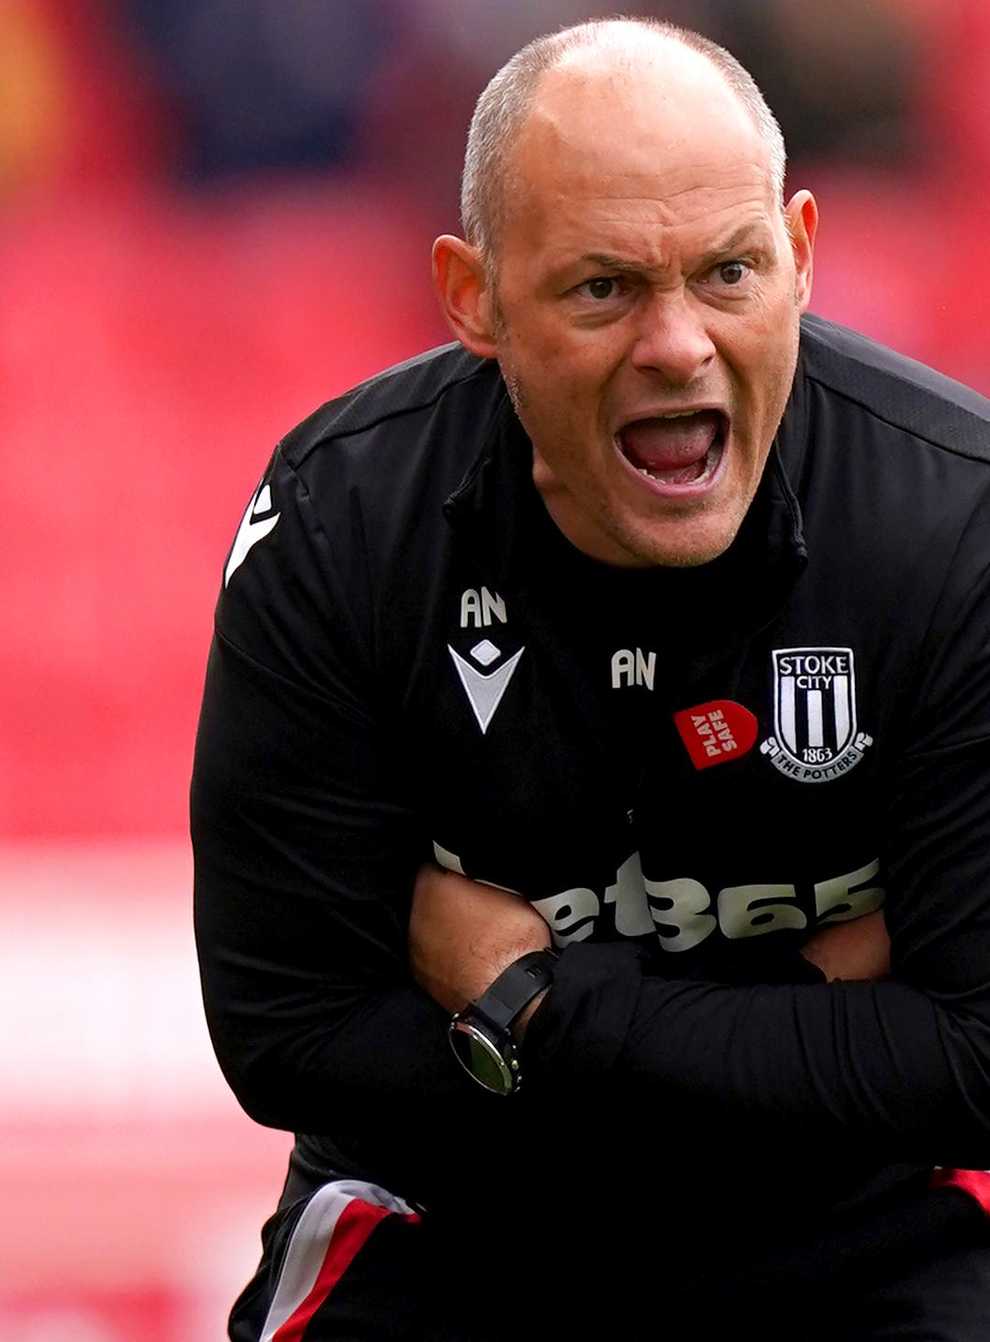 Stoke manager Alex Neil will be without a number of players for his side’s match against Sheffield United (Nick Potts/PA)